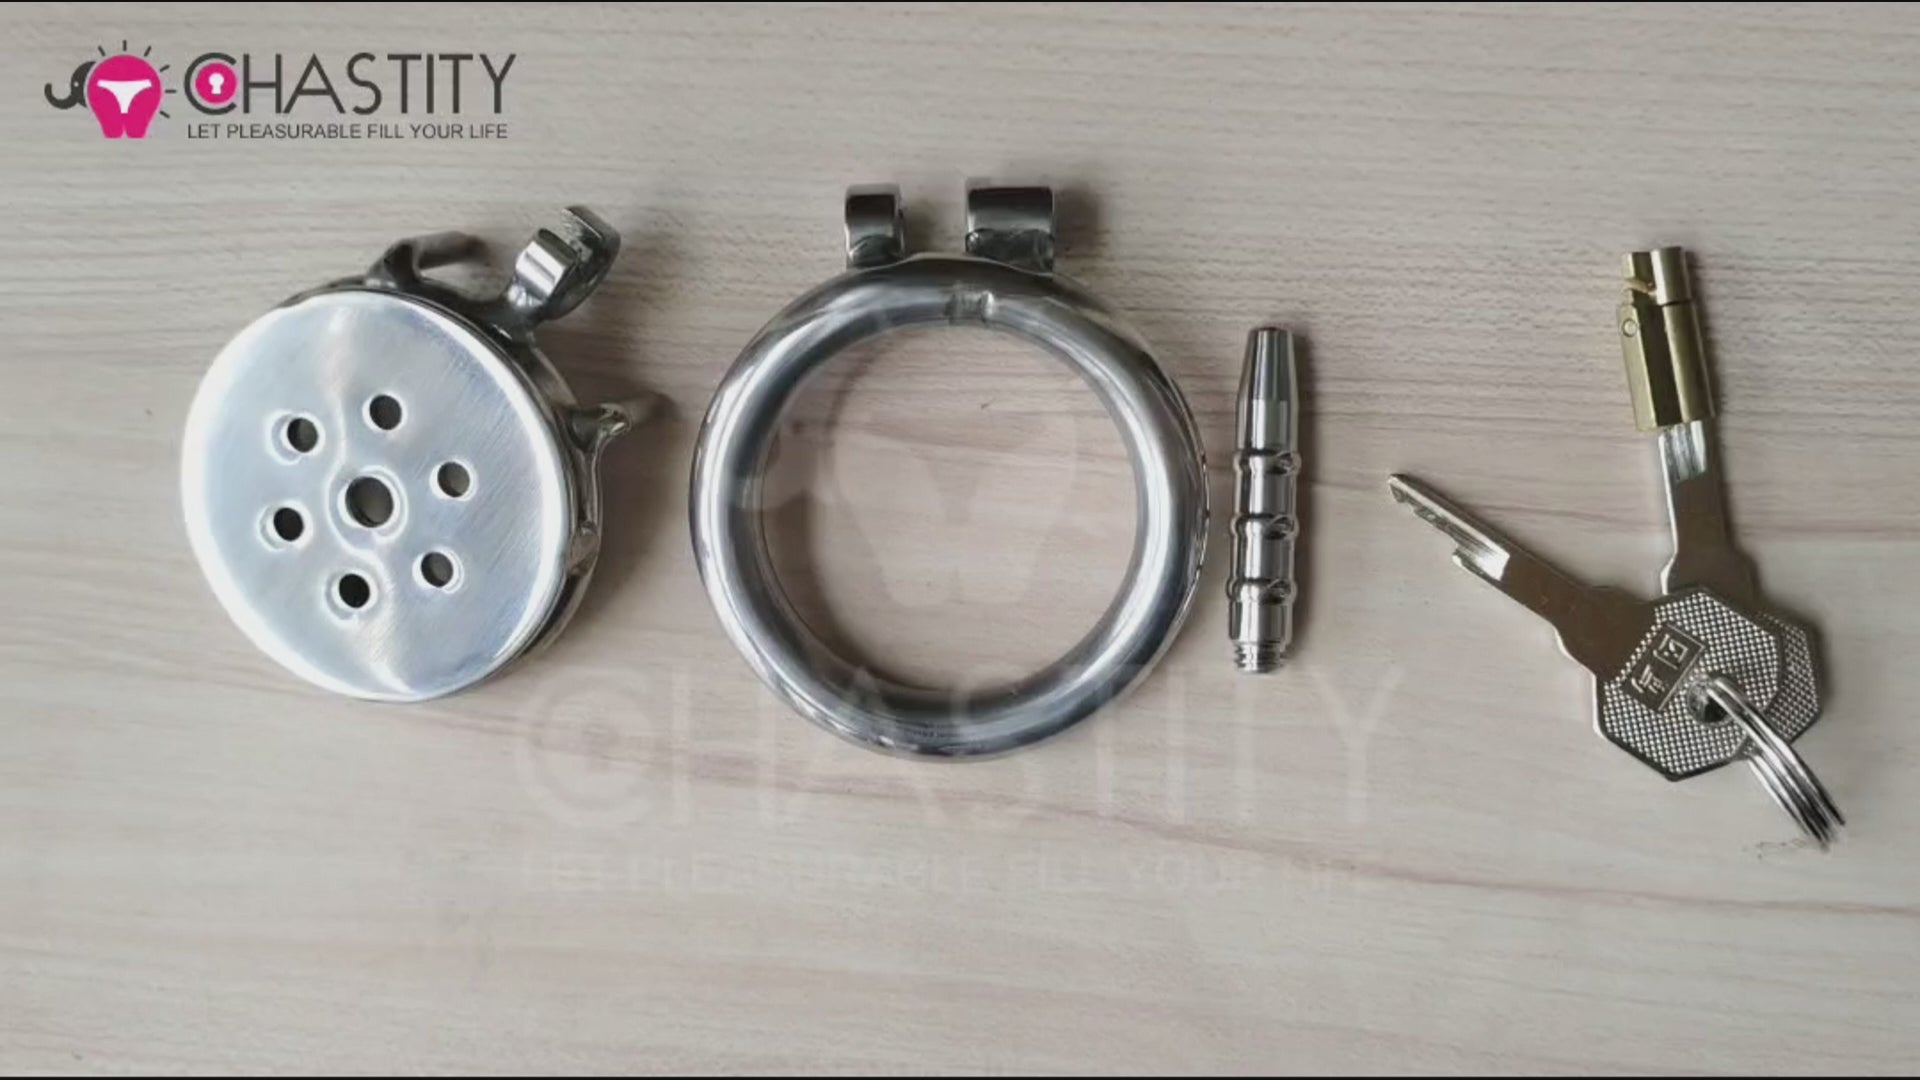 chastity device with catheter